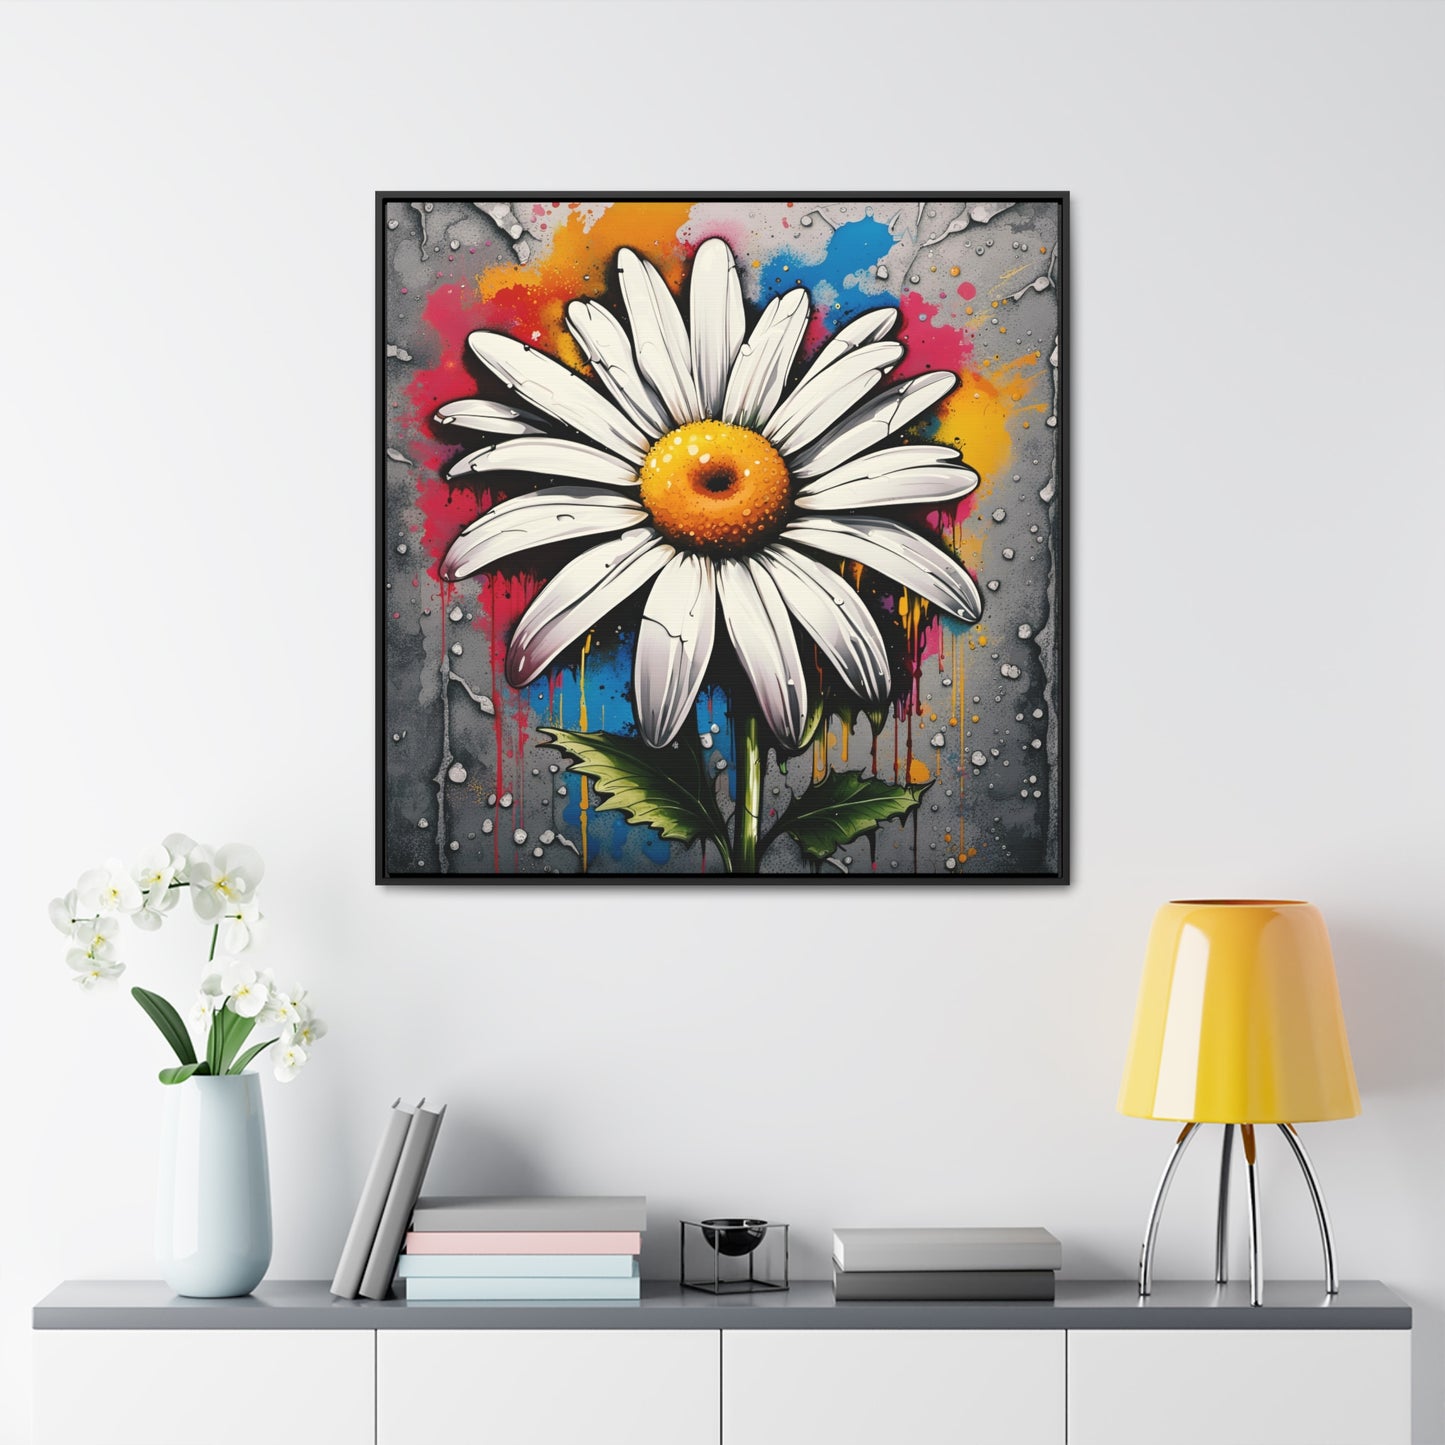 Floral themed Wall Art Print - Street Art Style Graffiti Daisy Printed on Canvas in a Floating Frame 36x36